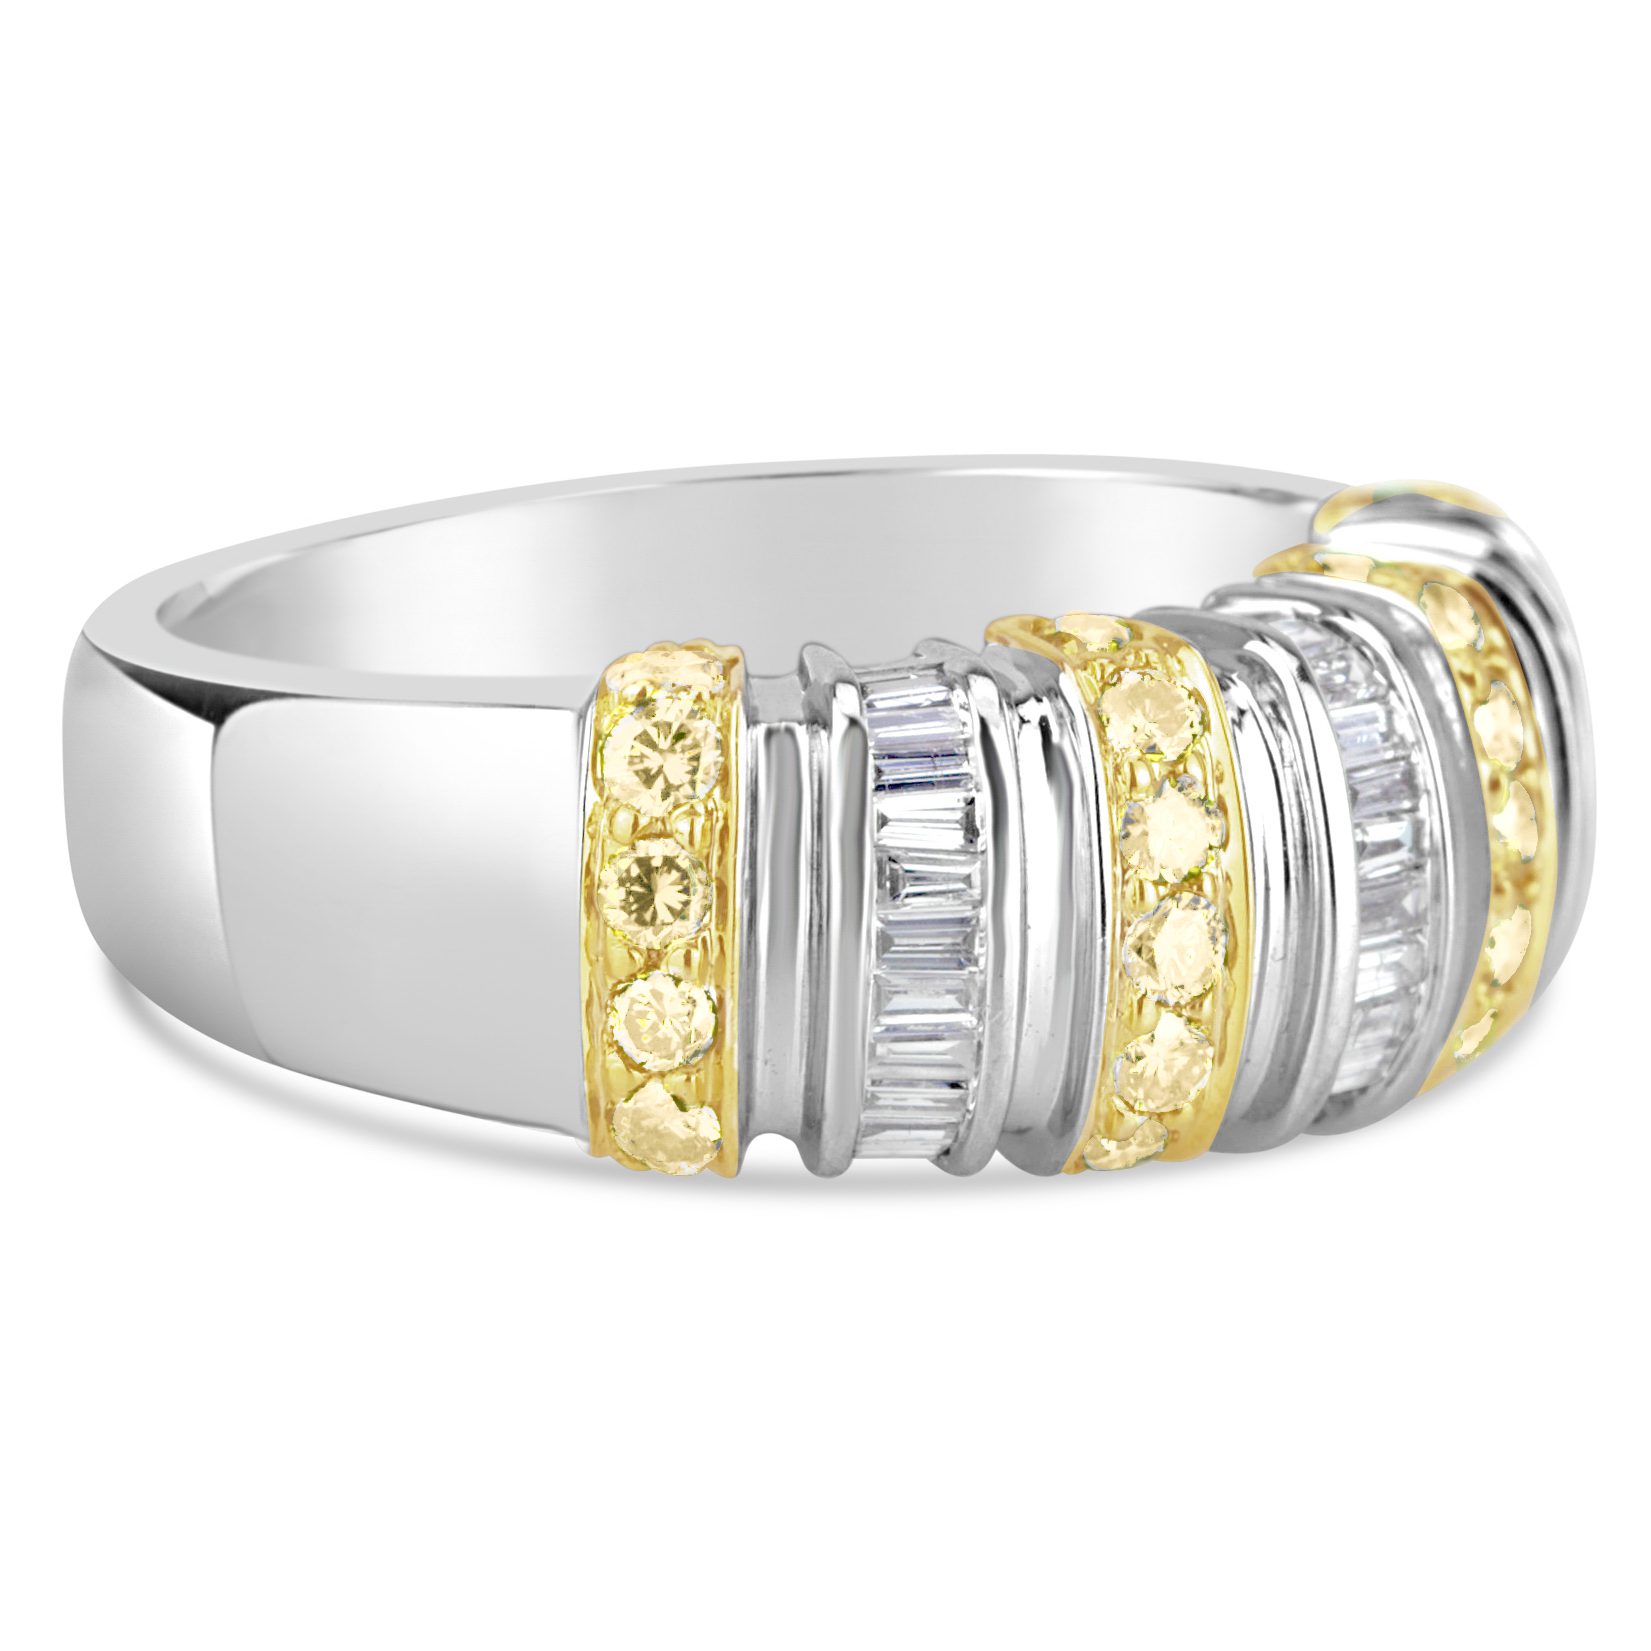 yellow round diamonds and white baguette diamonds in 14k yellow and white gold